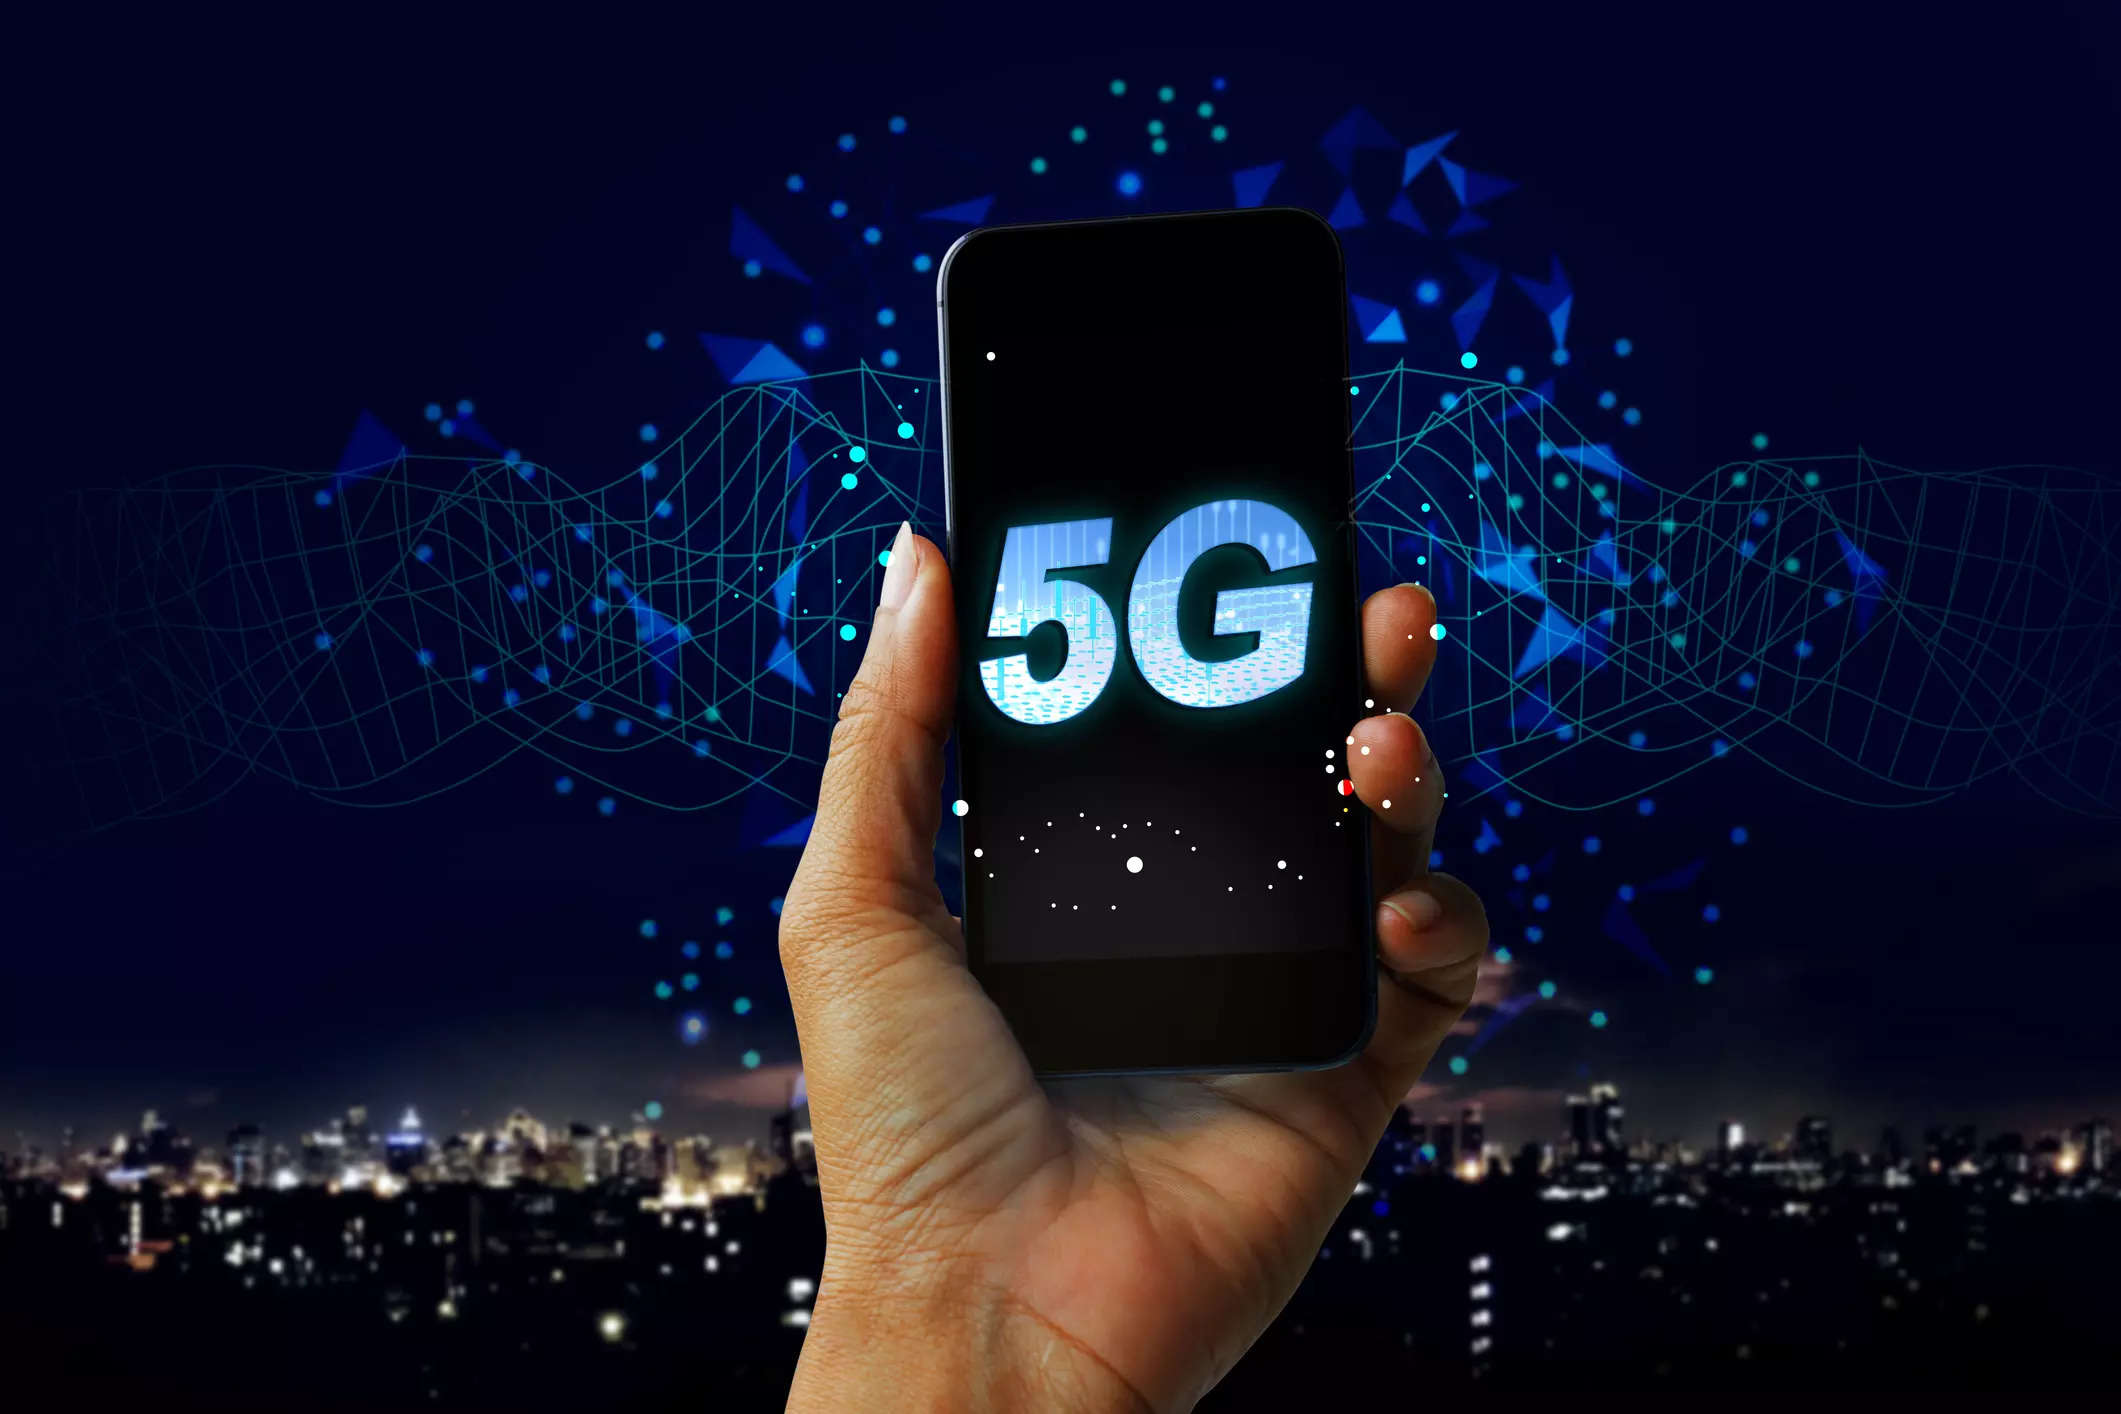  Trai also set rates for new bands in the 600 MHz and millimetre wave (mmWave)–24.25-28.5 GHz–bands, at Rs3,927 crore a unit and Rs6.99 lakh per MHz, respectively. Besides, Trai also recommended fresh starting prices for the 800 MHz, 900 MHz, 1800 MHz, 2100 MHz, 2300 MHz and 2500 MHz bands, all of which can be used for 5G in the future.